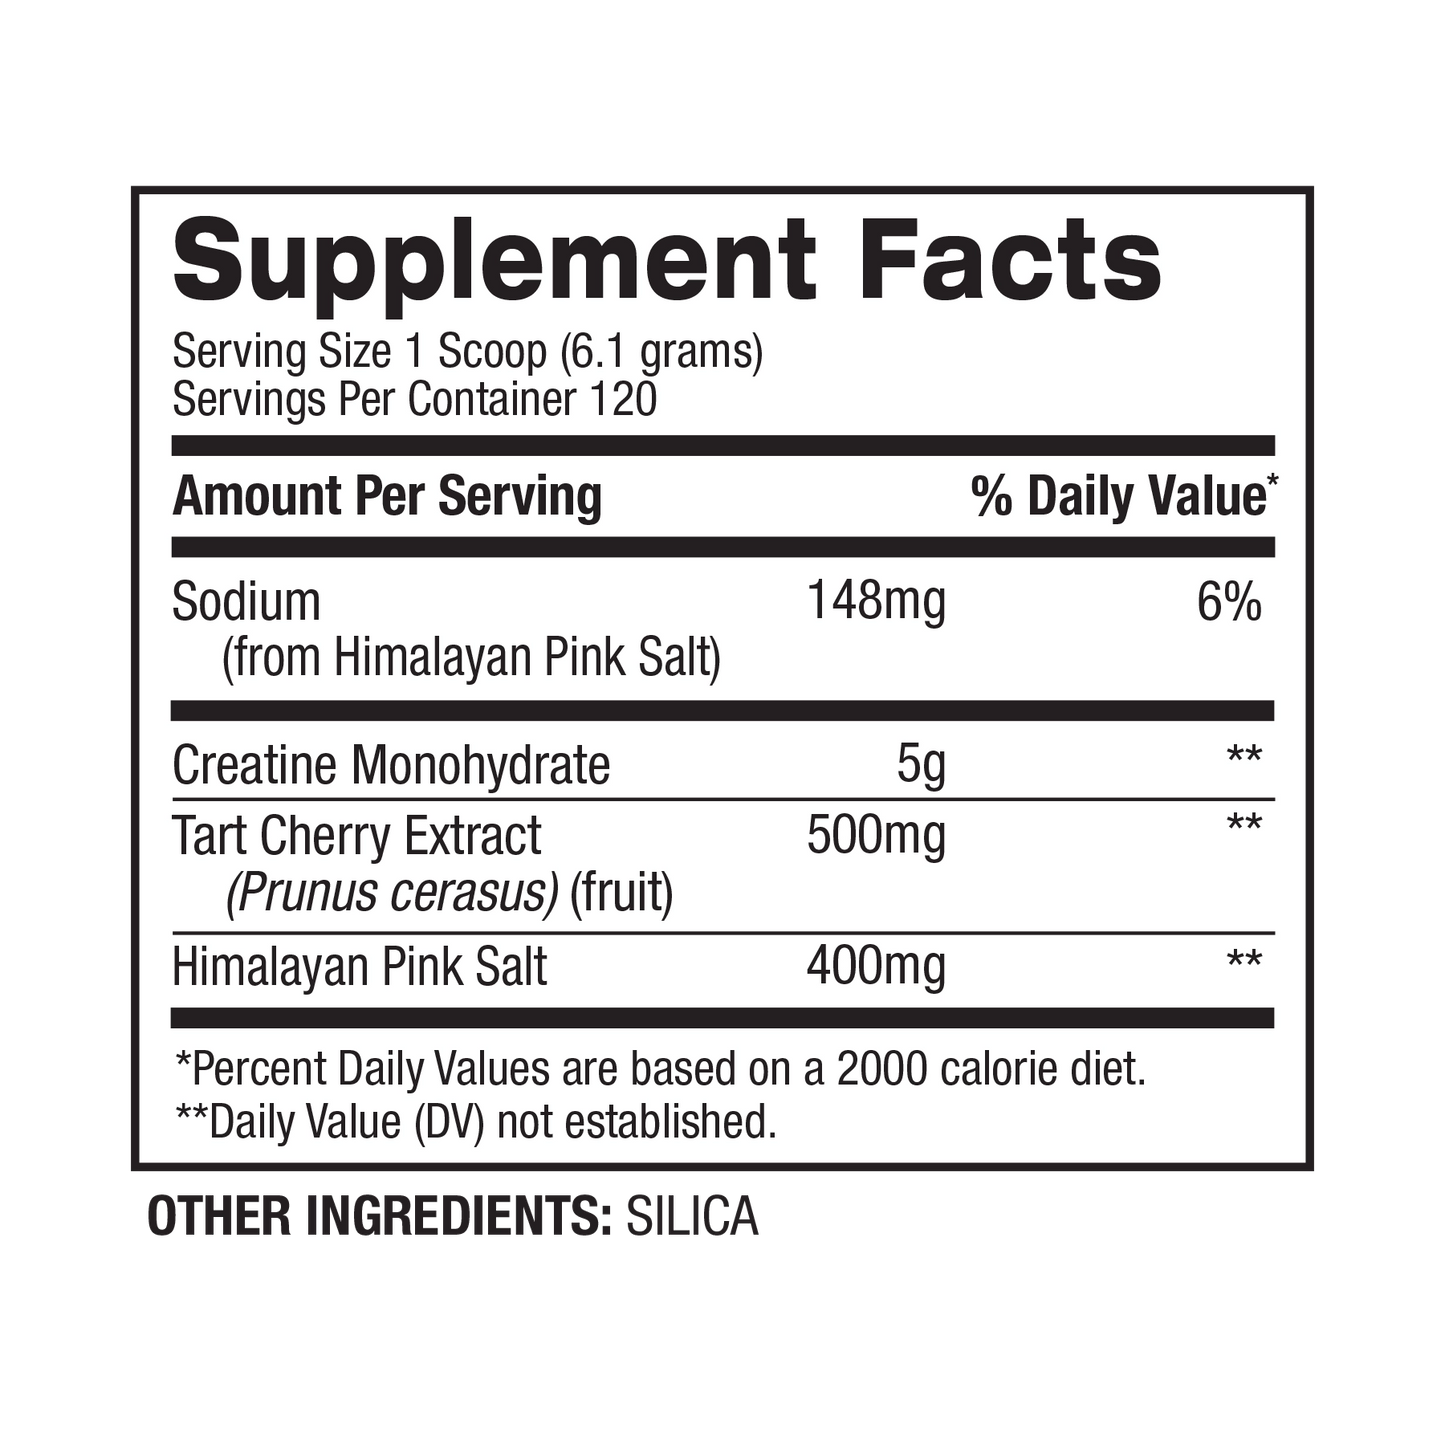 micro creatine supp facts variant